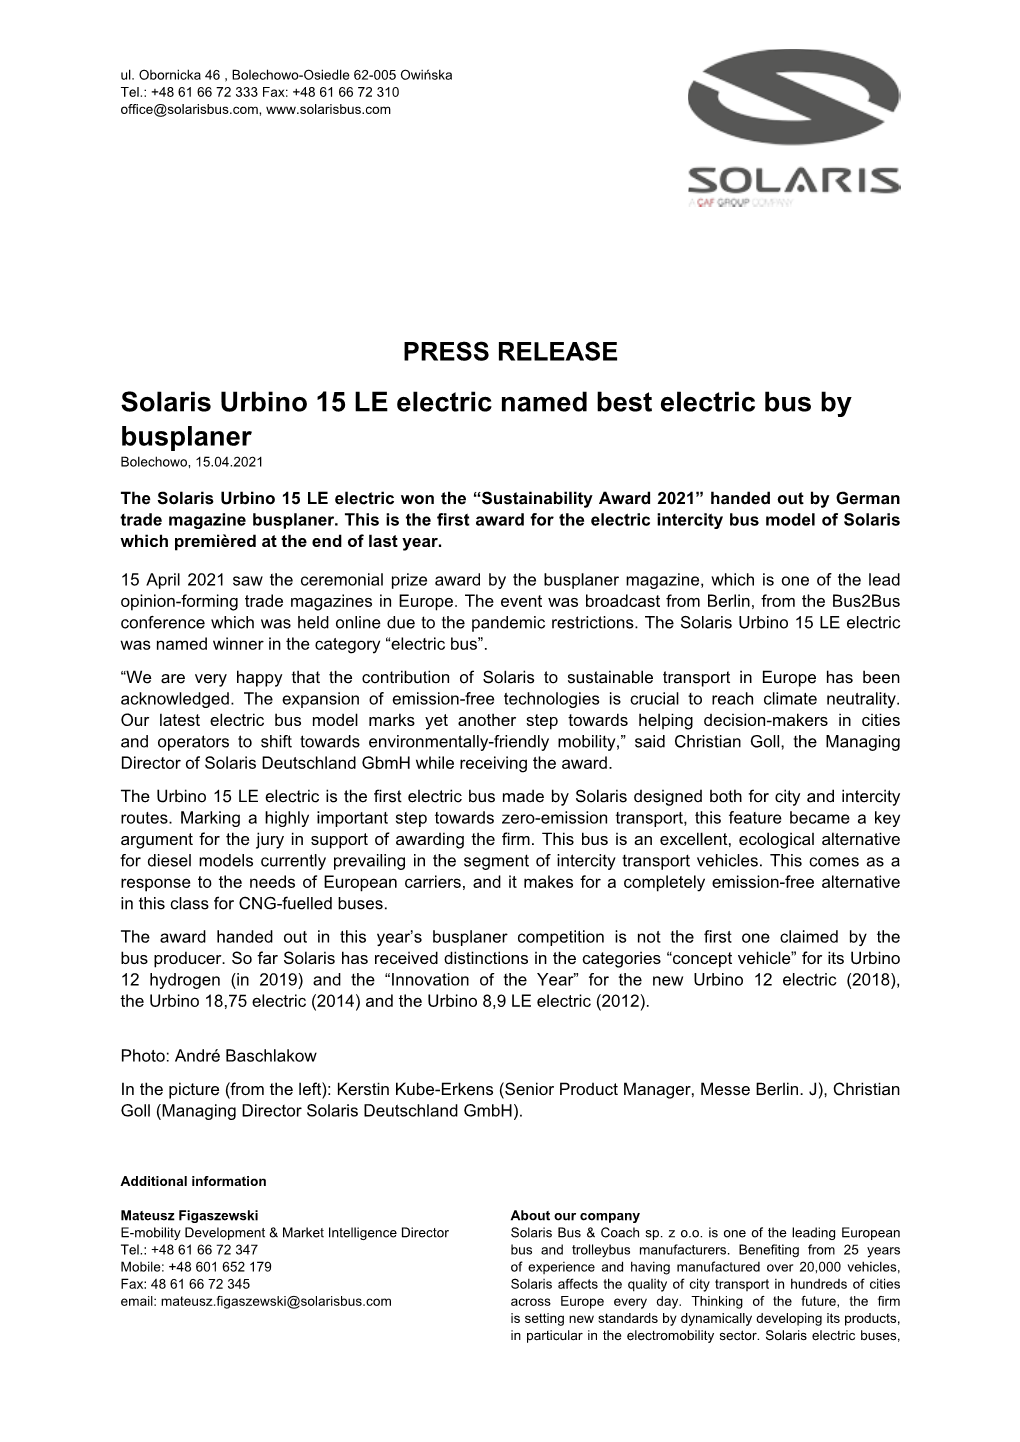 PRESS RELEASE Solaris Urbino 15 LE Electric Named Best Electric Bus